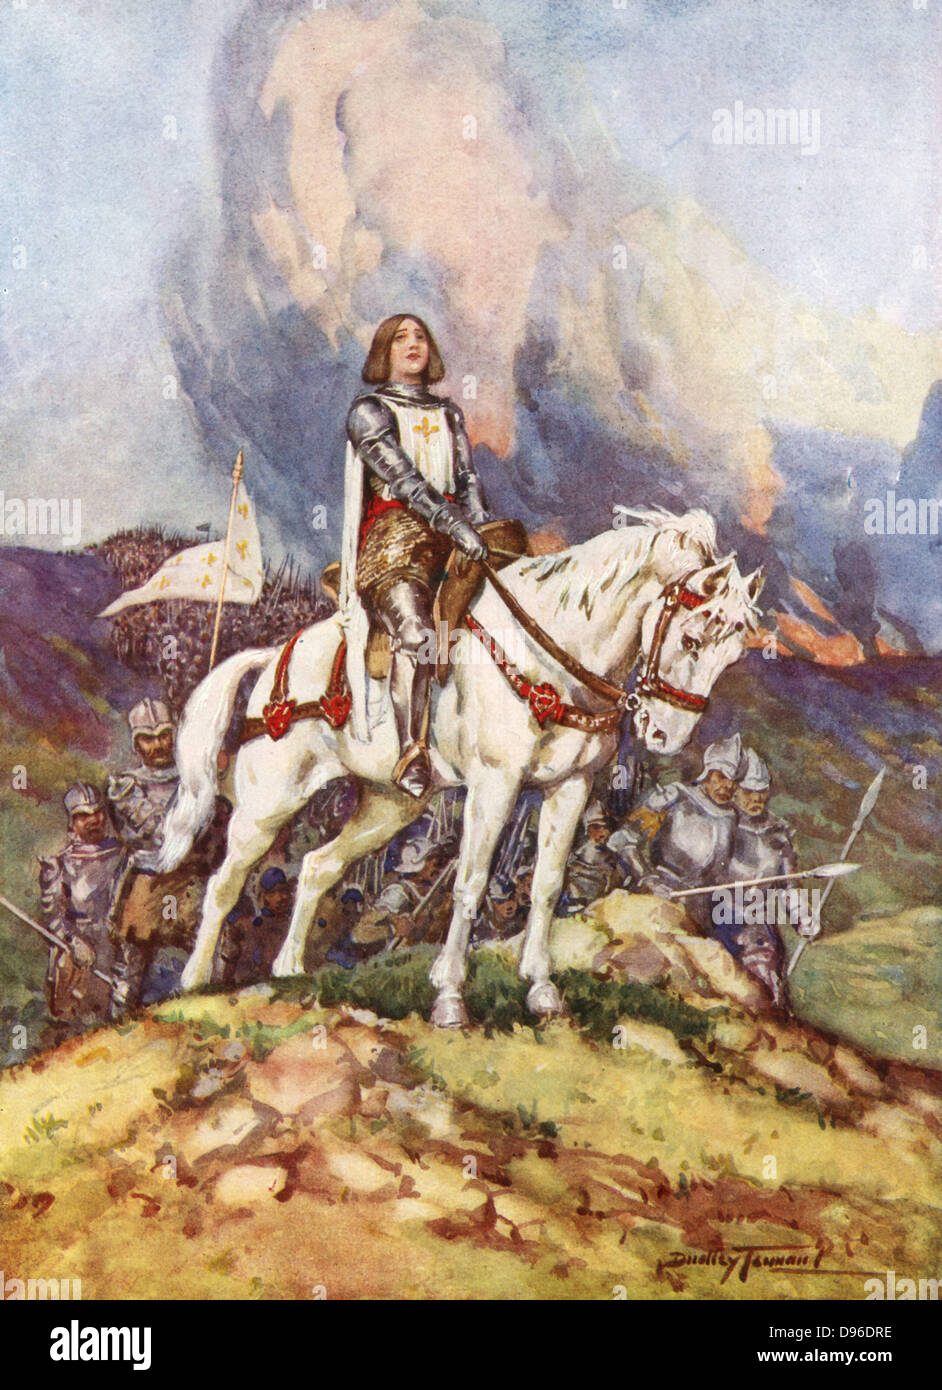 Joan of Arc (c1412-31) St Joan, St Jeanne d'Arc, the Maid of Orleans.  French patriot and martyr. Joan at the head of the French army. Early 20th  century illustration Stock Photo -